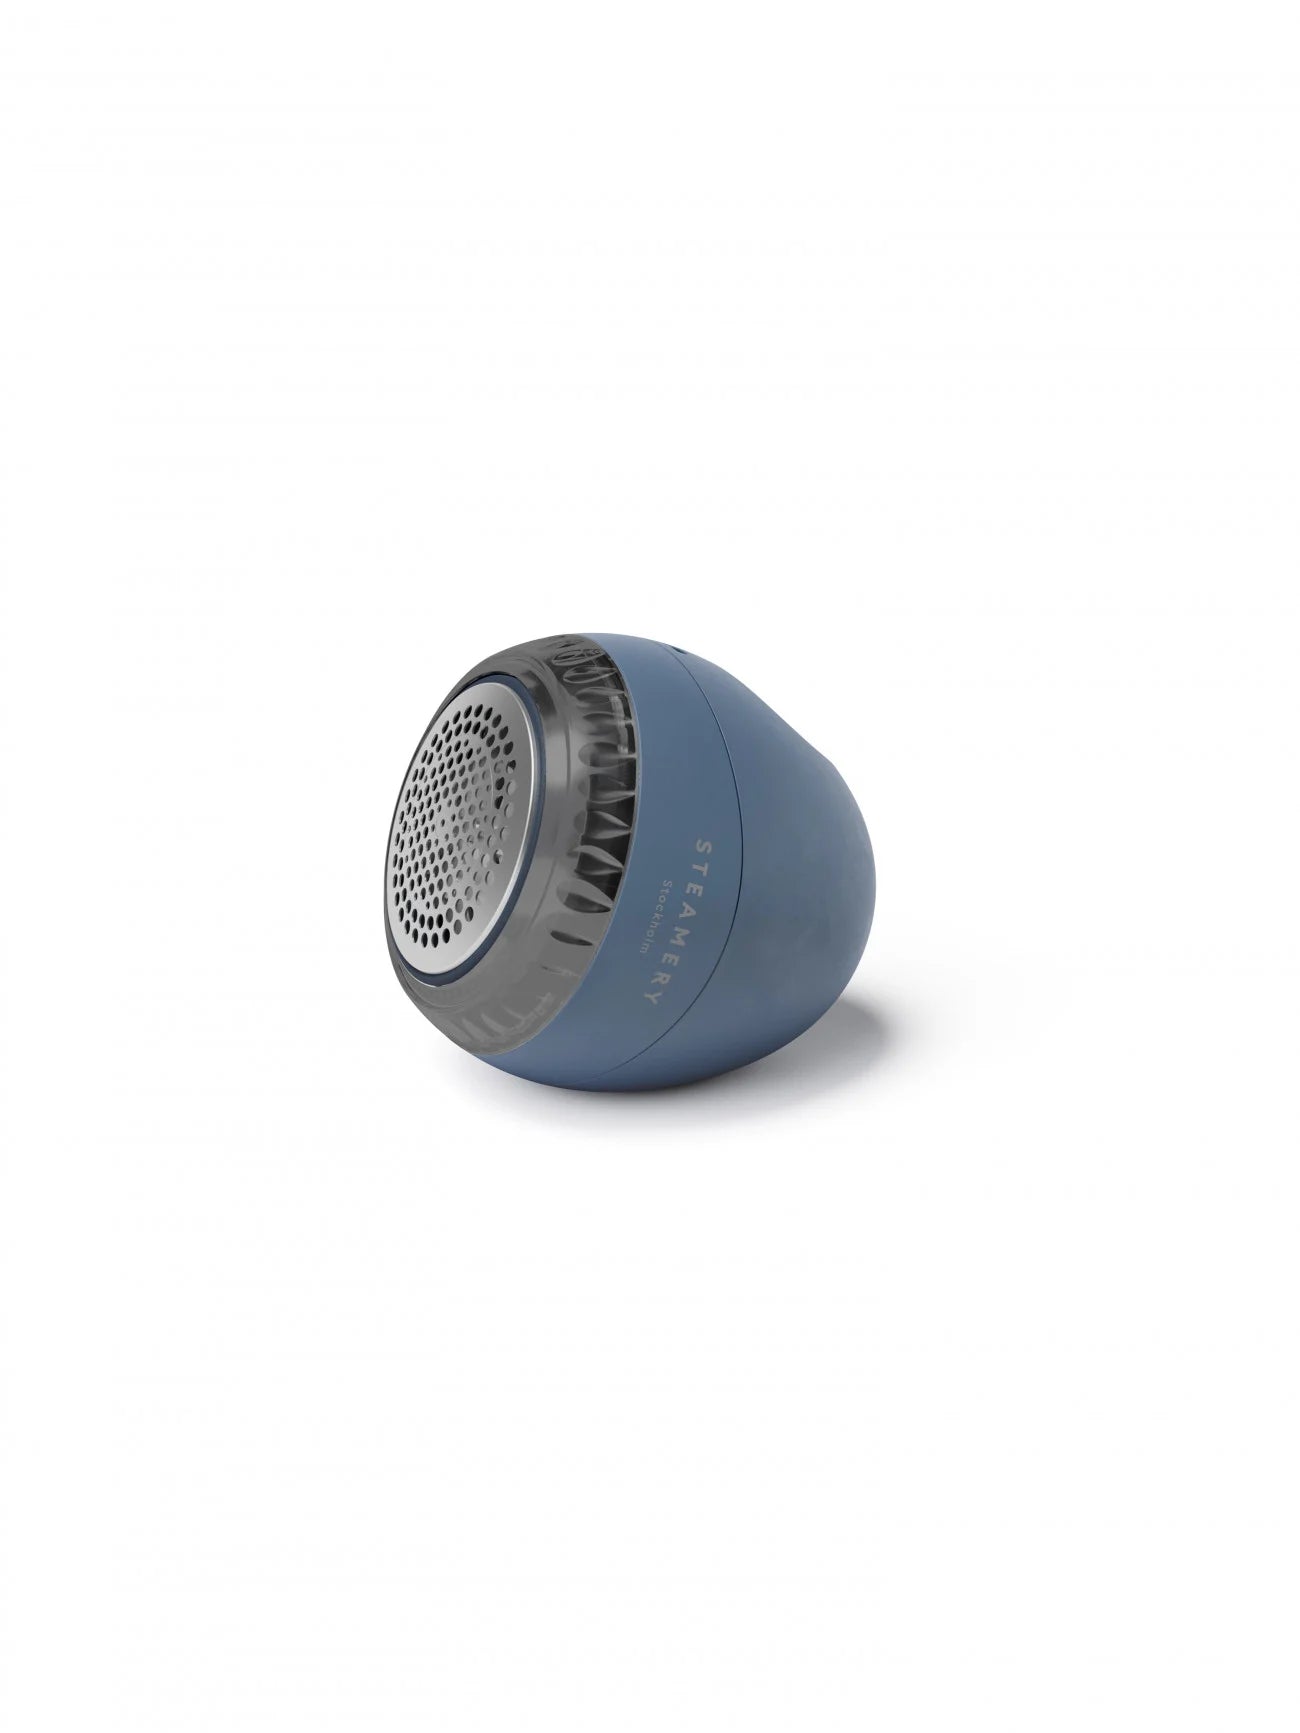 The Pilo Fabric Shaver - Blue is a gentle, yet effective fabric shaver that removes lint and pilling from all kinds of garments.